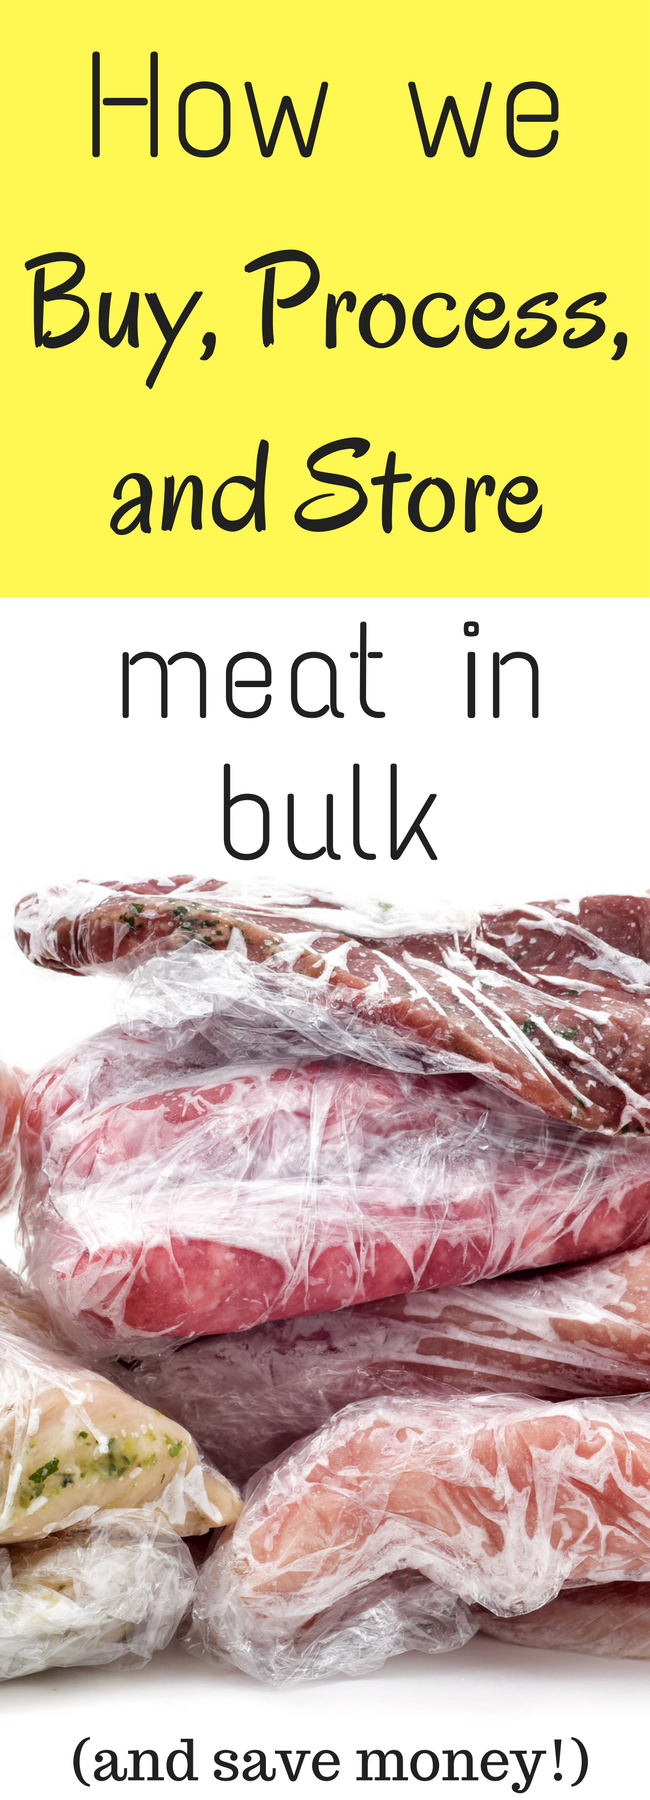 Buy meat in bulk / meat / chicken / Zaycon Fresh / Save Money on Groceries / Save Money / Cheap Meat / Money Saving Tips